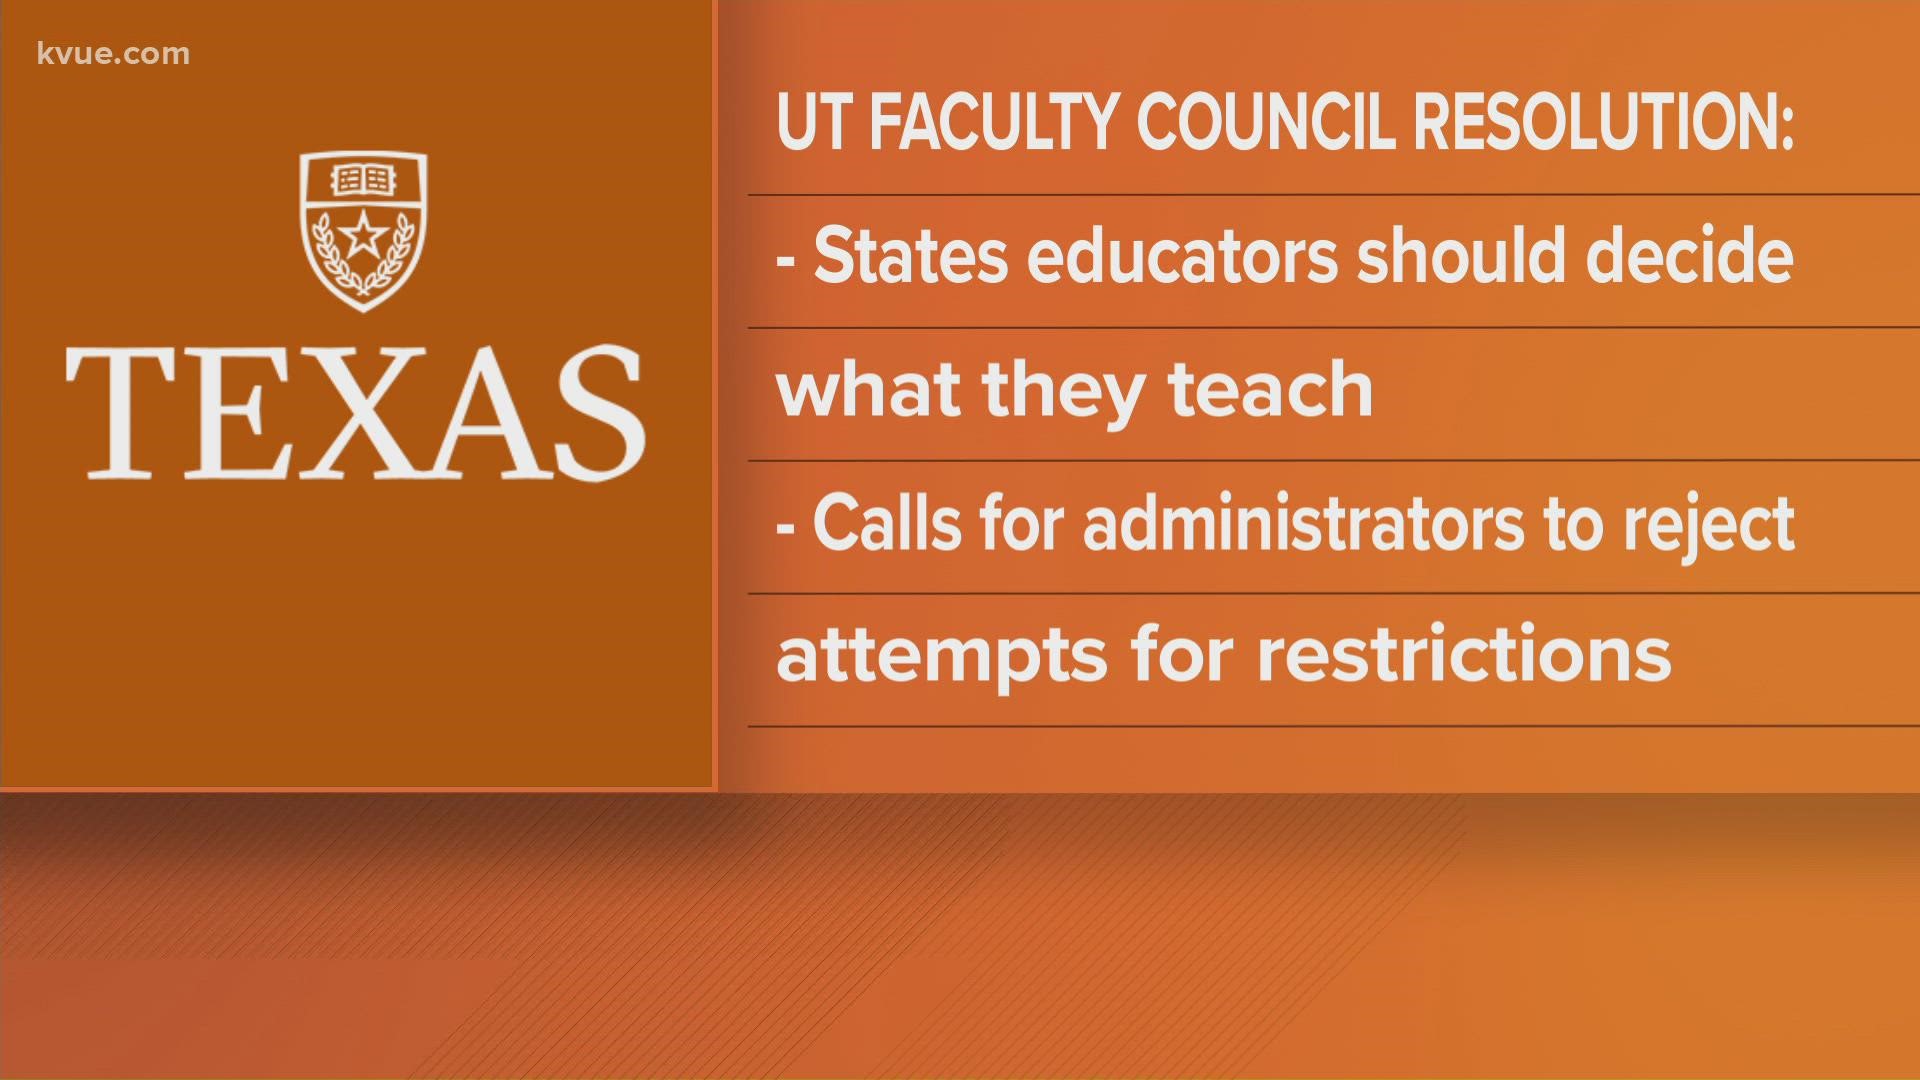 There is now more support for University of Texas instructors to teach what they want in their classrooms.